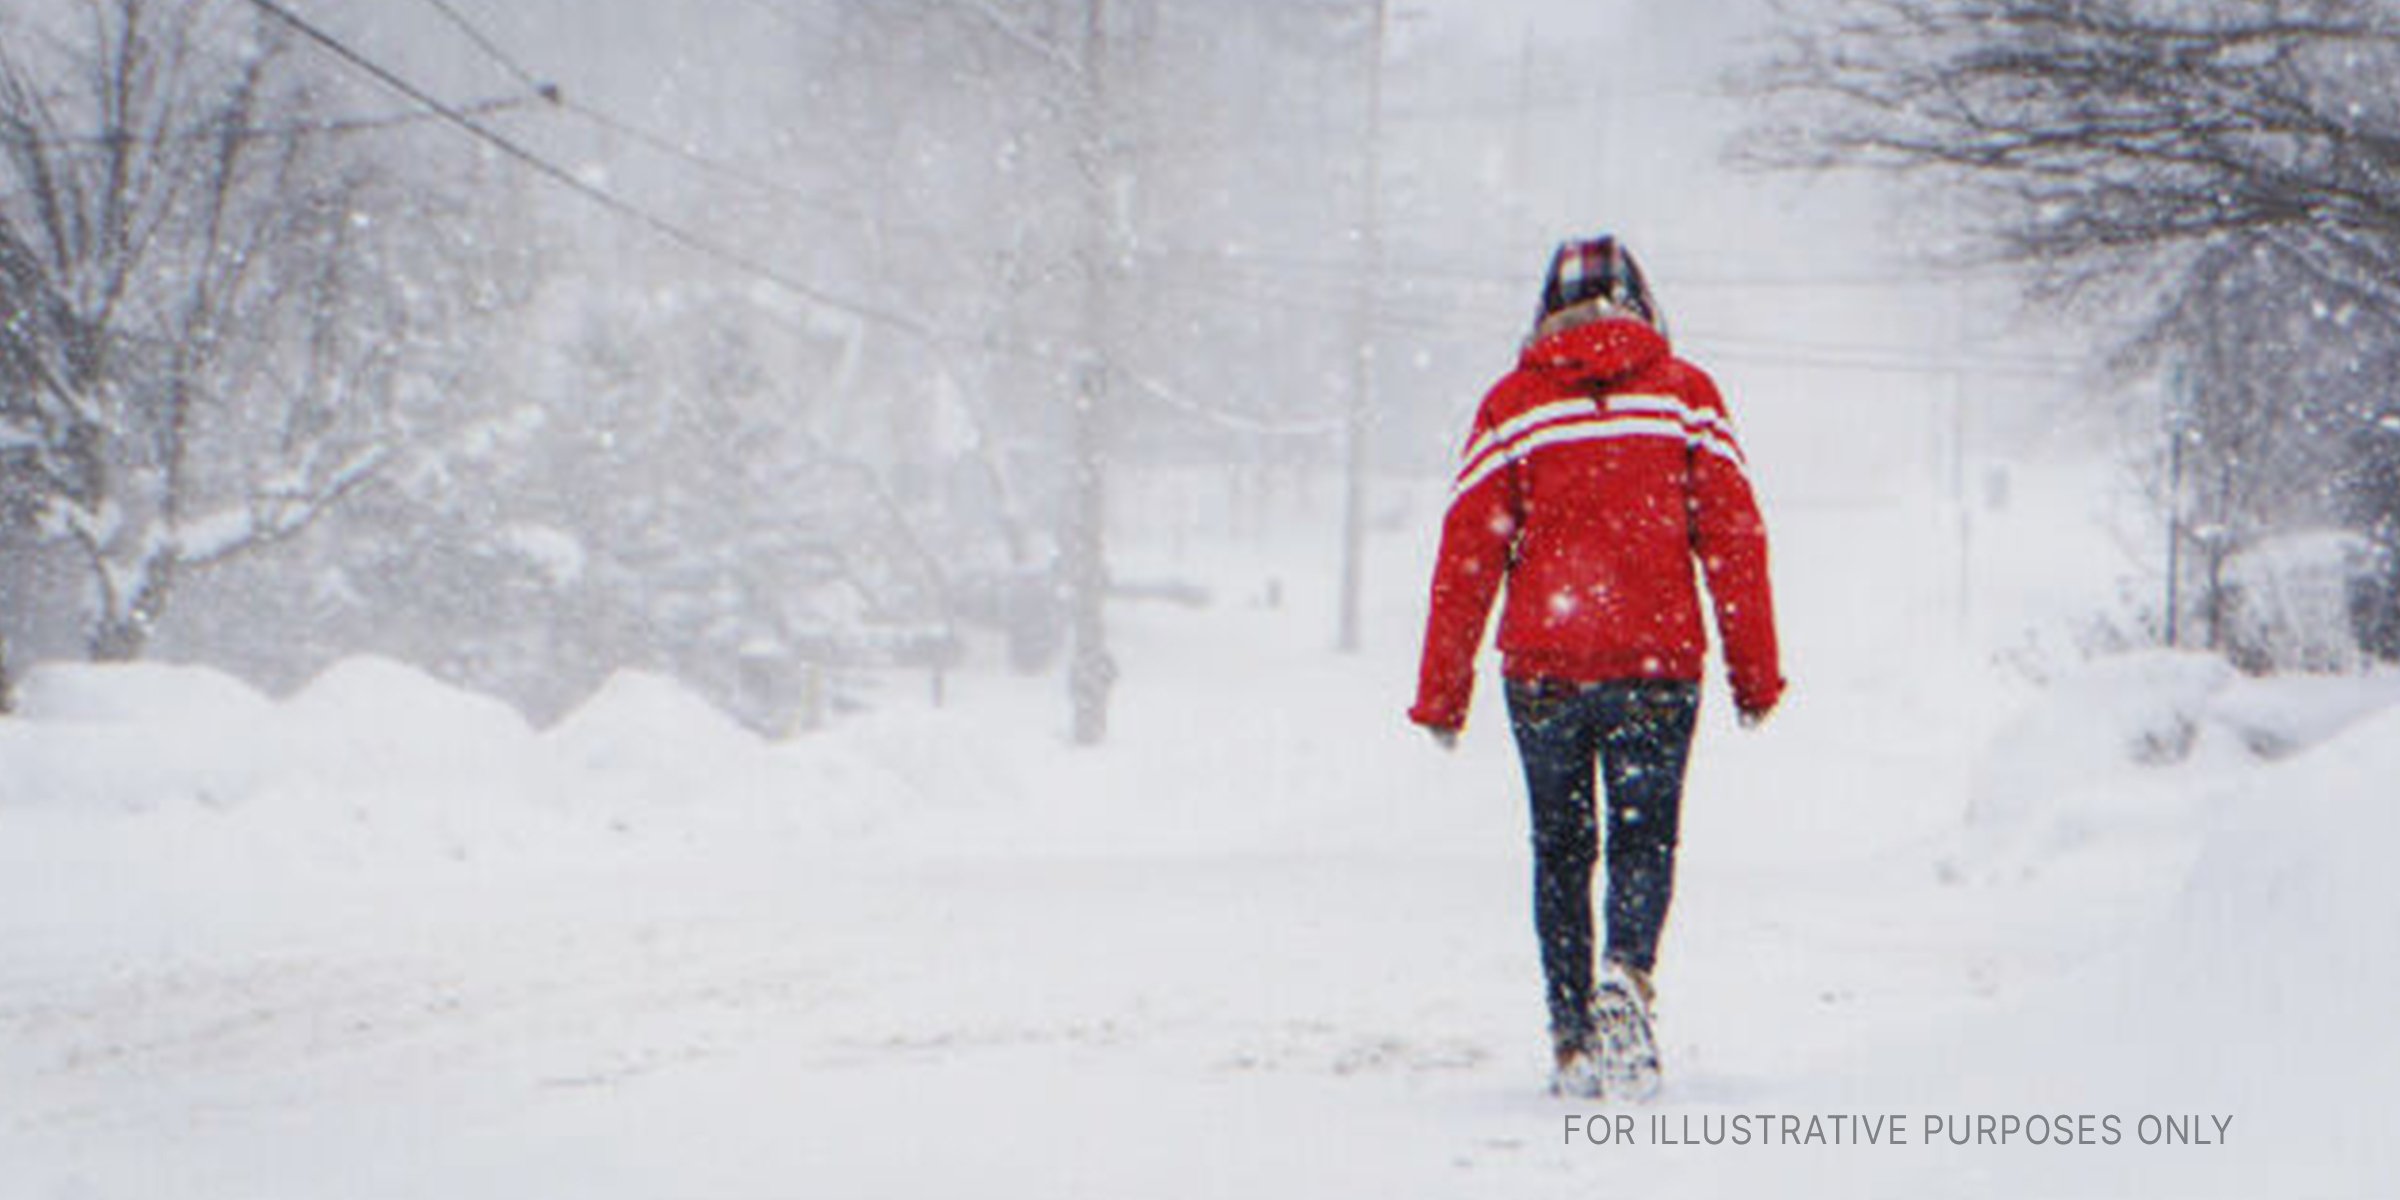 Woman walking on snow | Source: Getty Images